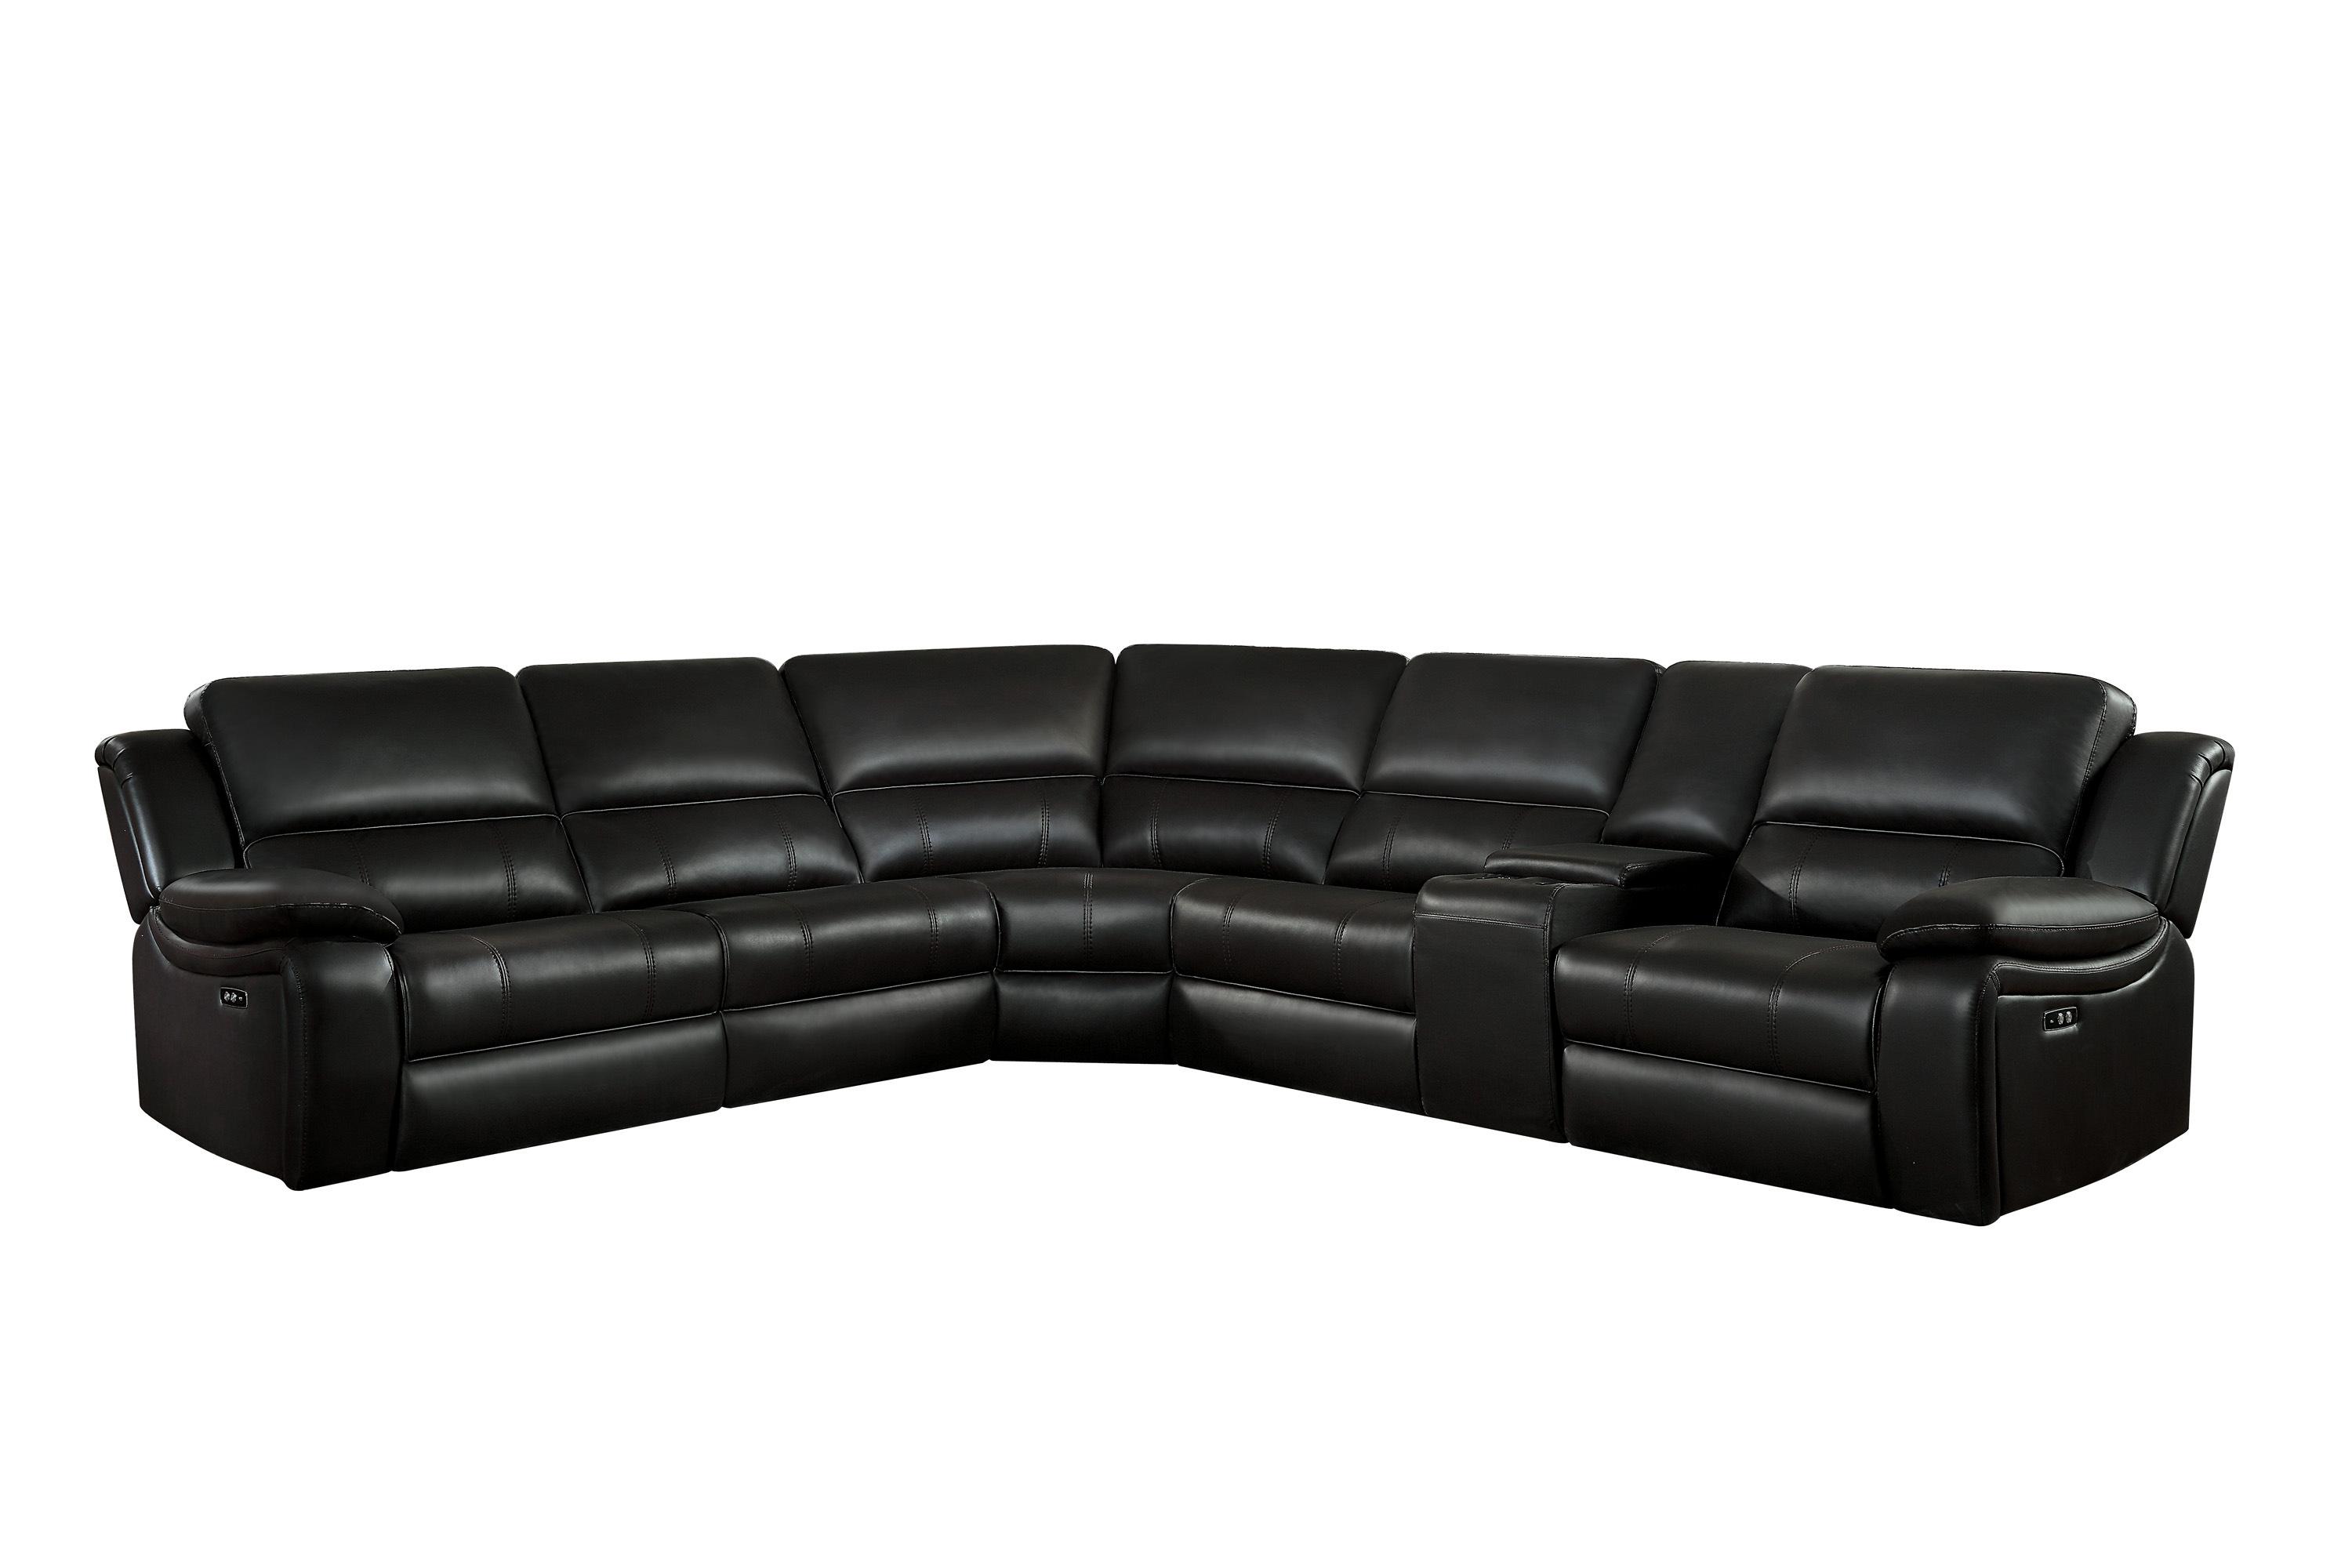 Modern Power Reclining Sectional 8260DB*6PW Falun 8260DB*6PW in Dark Brown Faux Leather